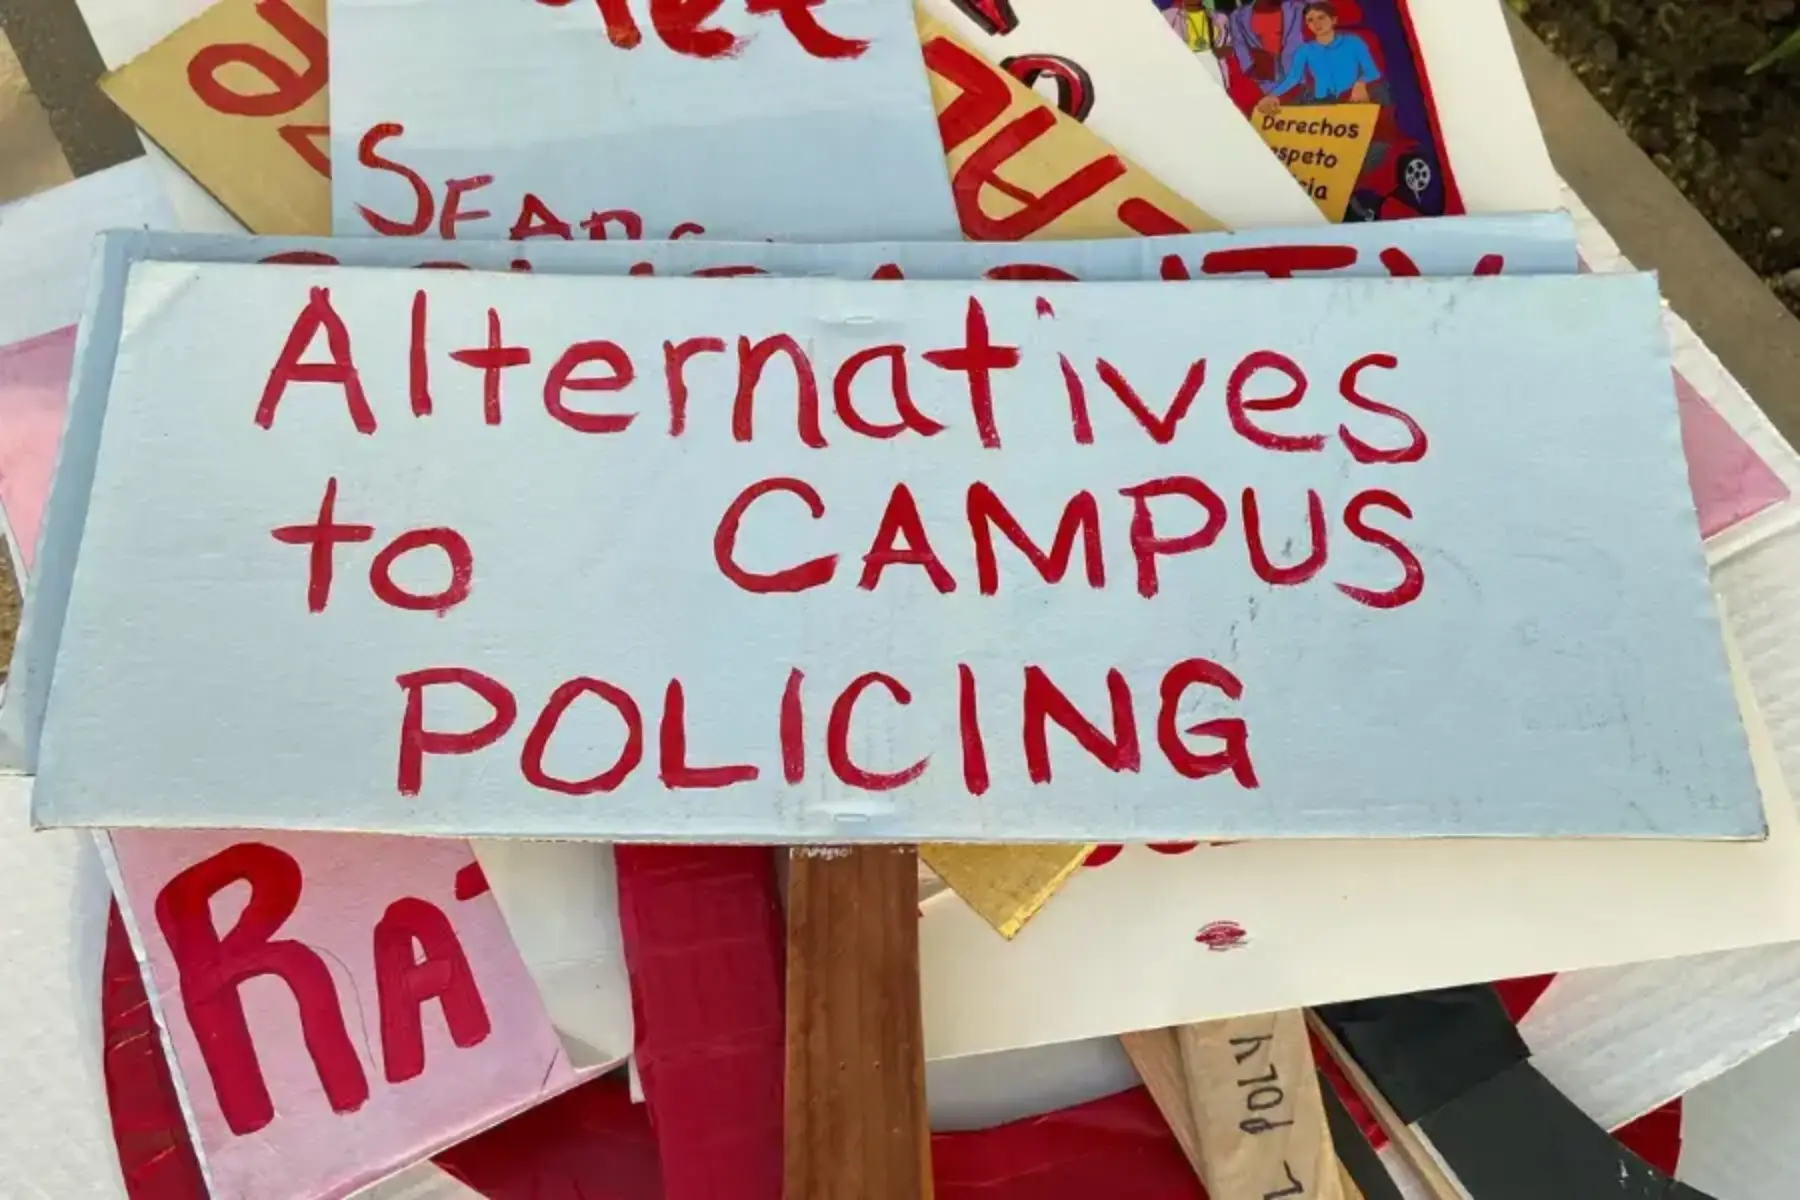 Sign saying "Alternatives to campus policing"